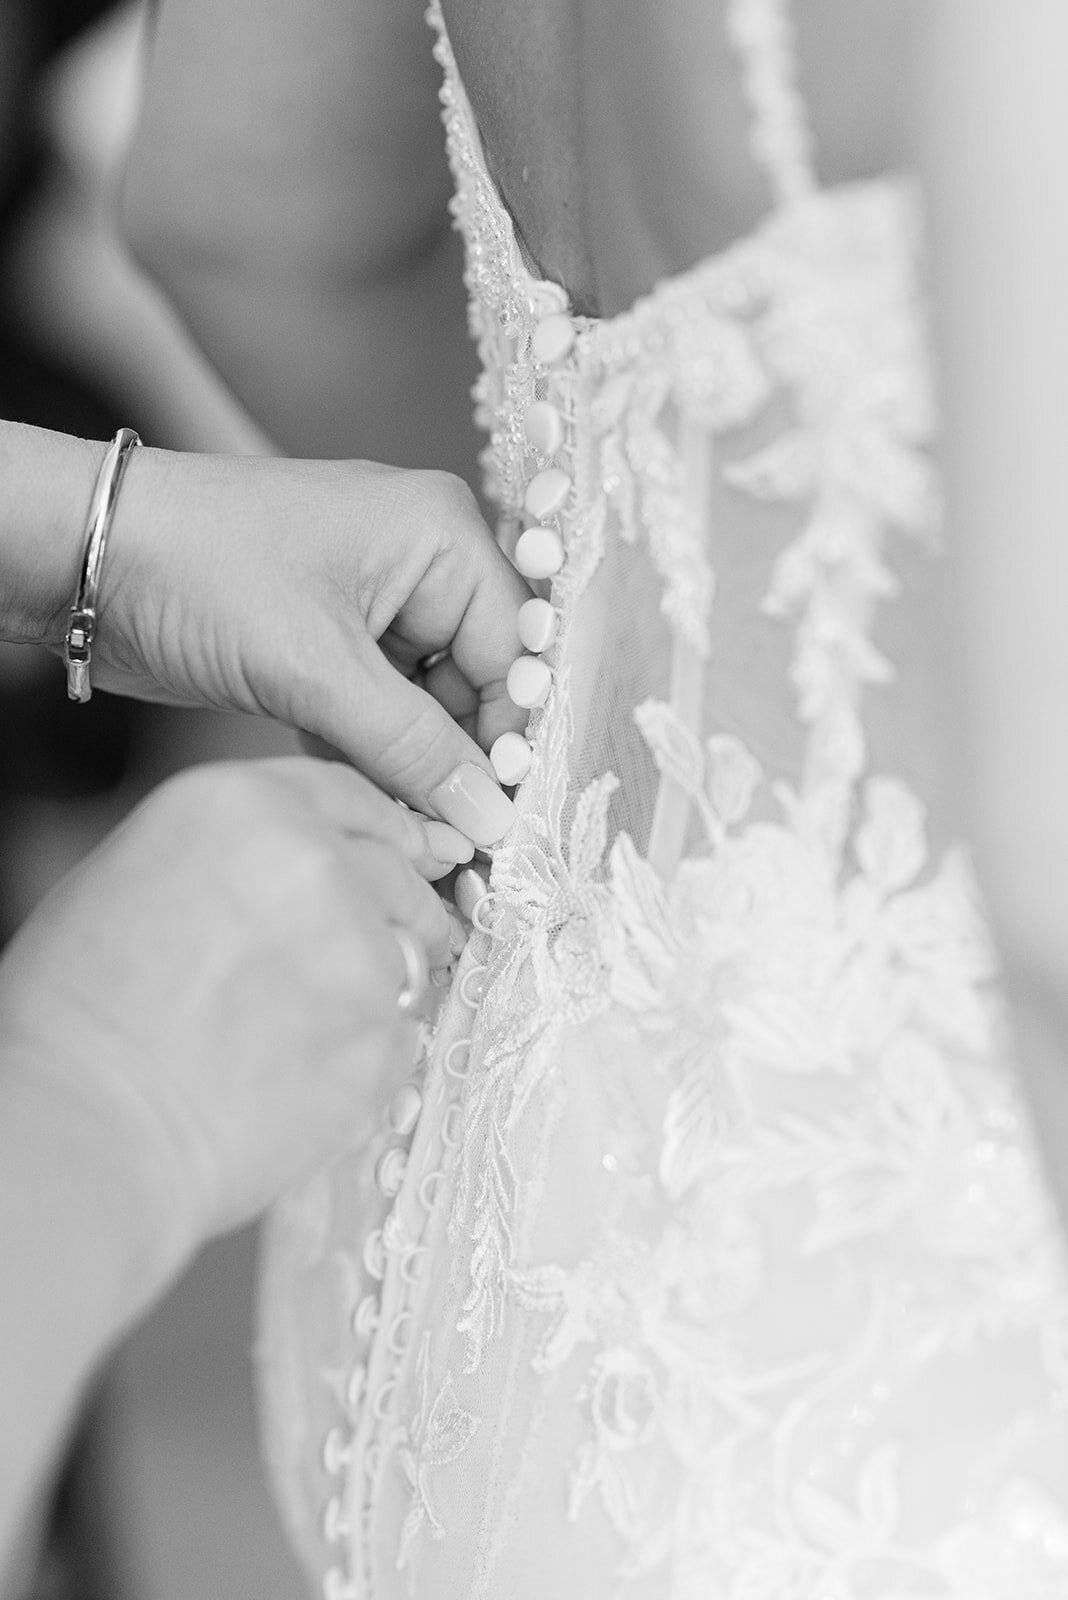 Black and white image of a bride in her dress, details of the dress being done up.